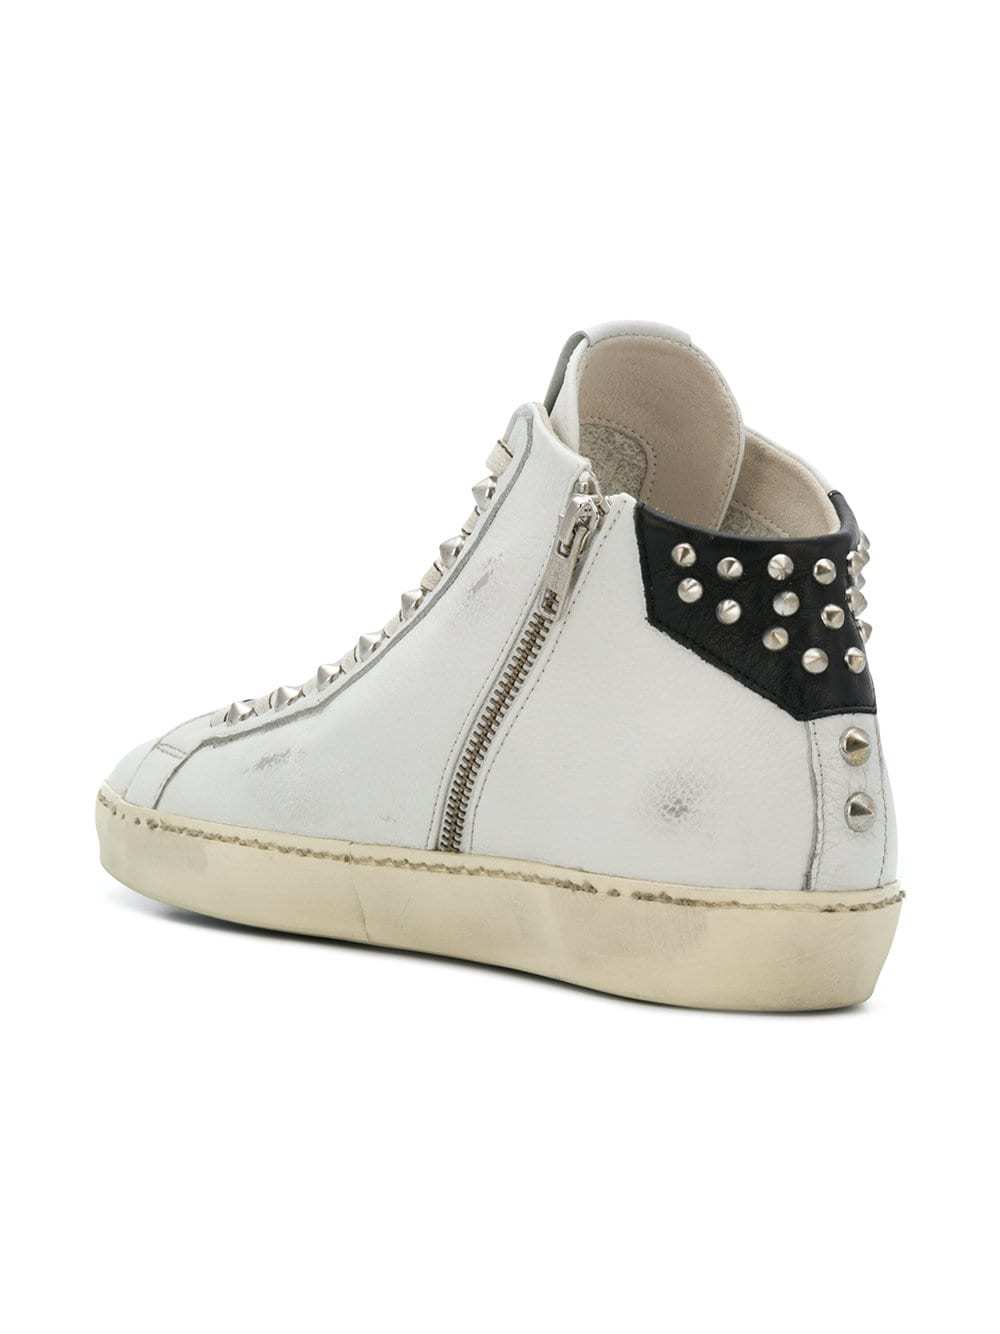 leather crown high top sneakers